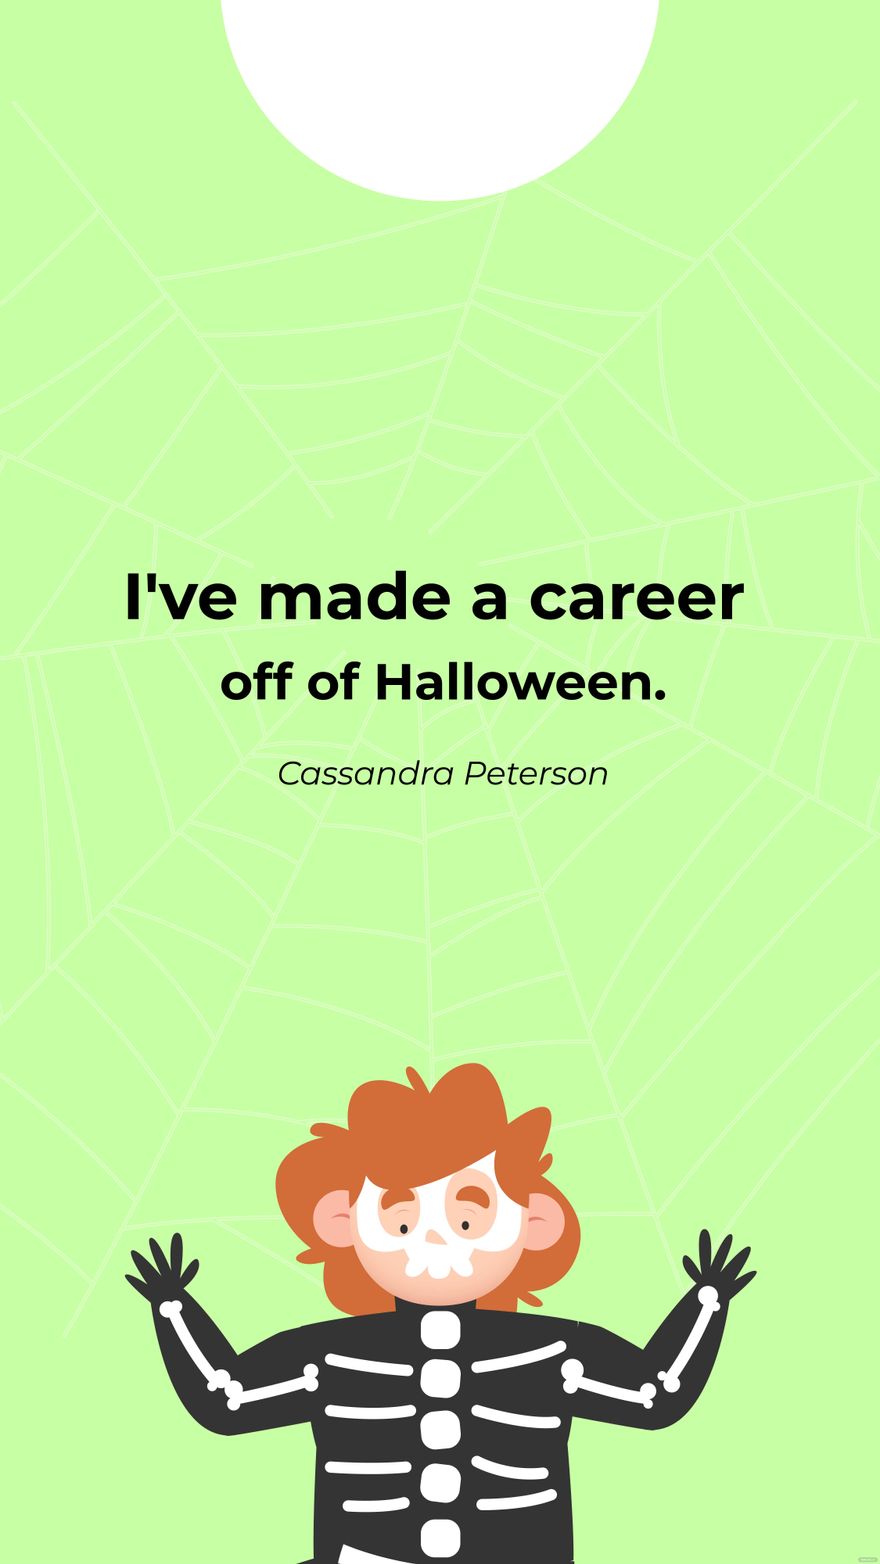 Free Cassandra Peterson- I've made a career off of Halloween. 